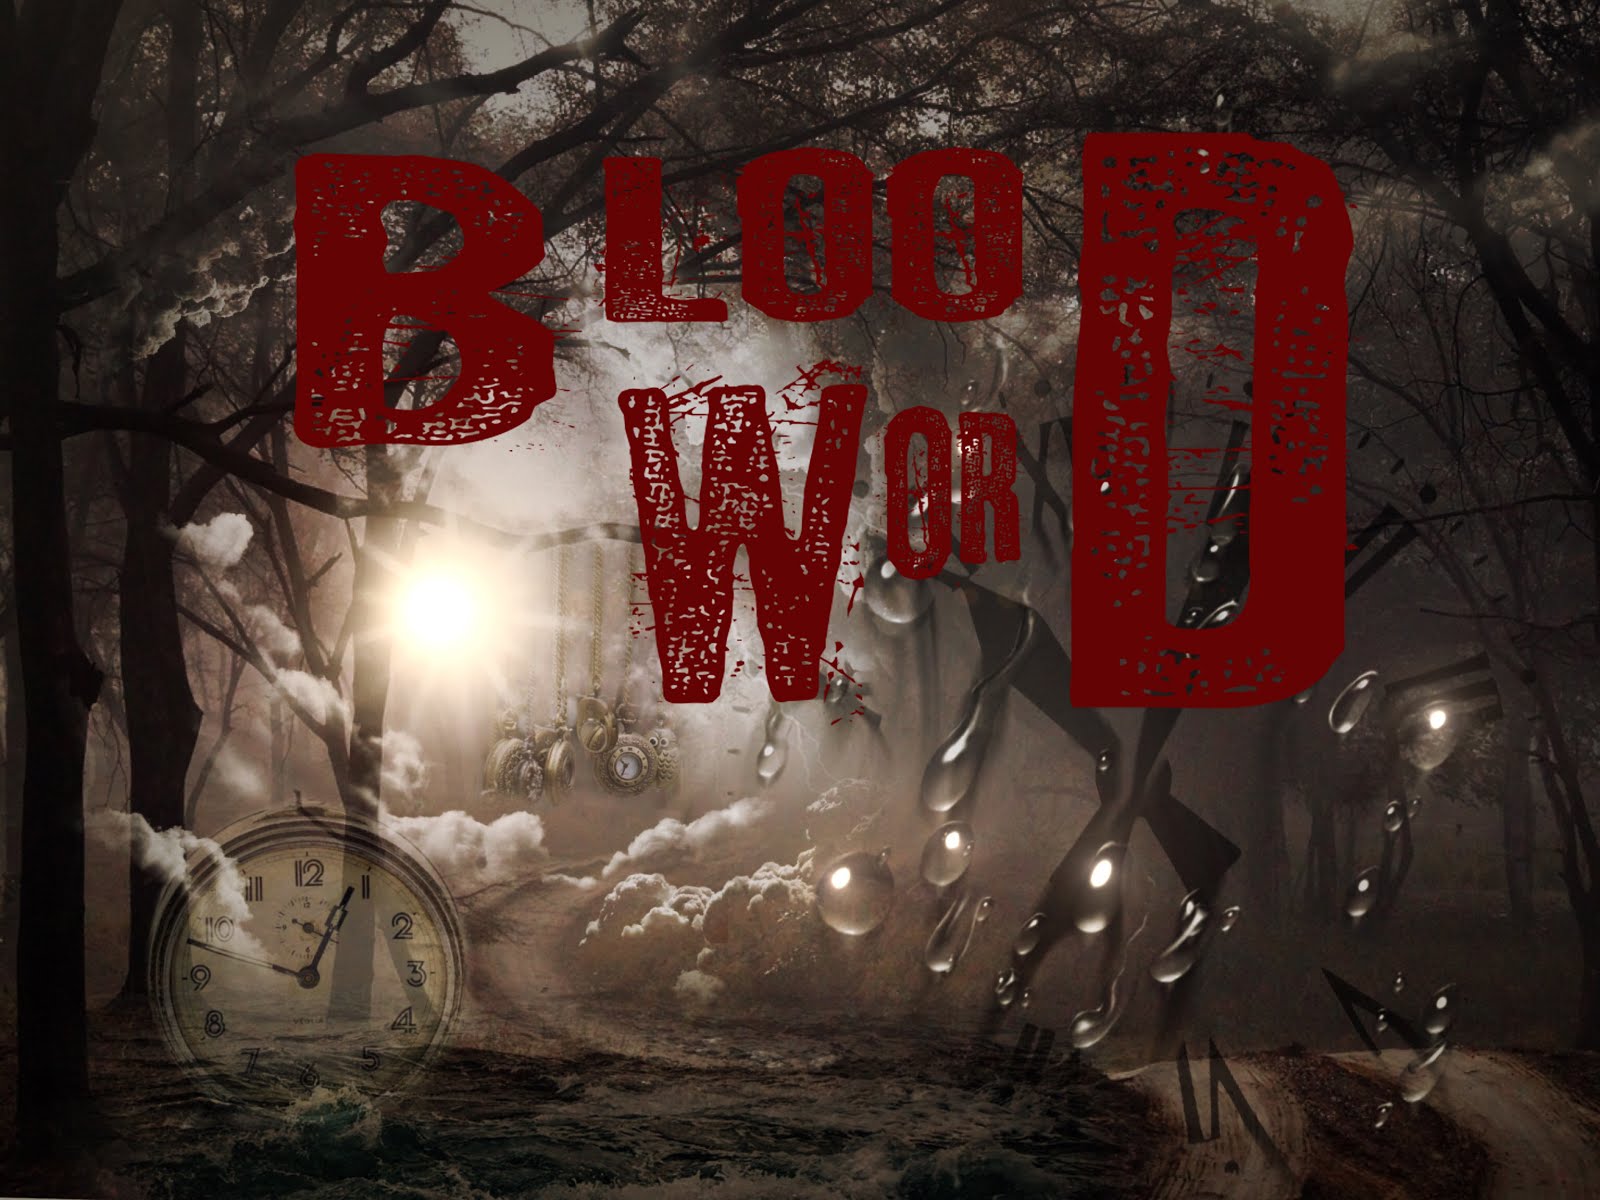 BloodWord